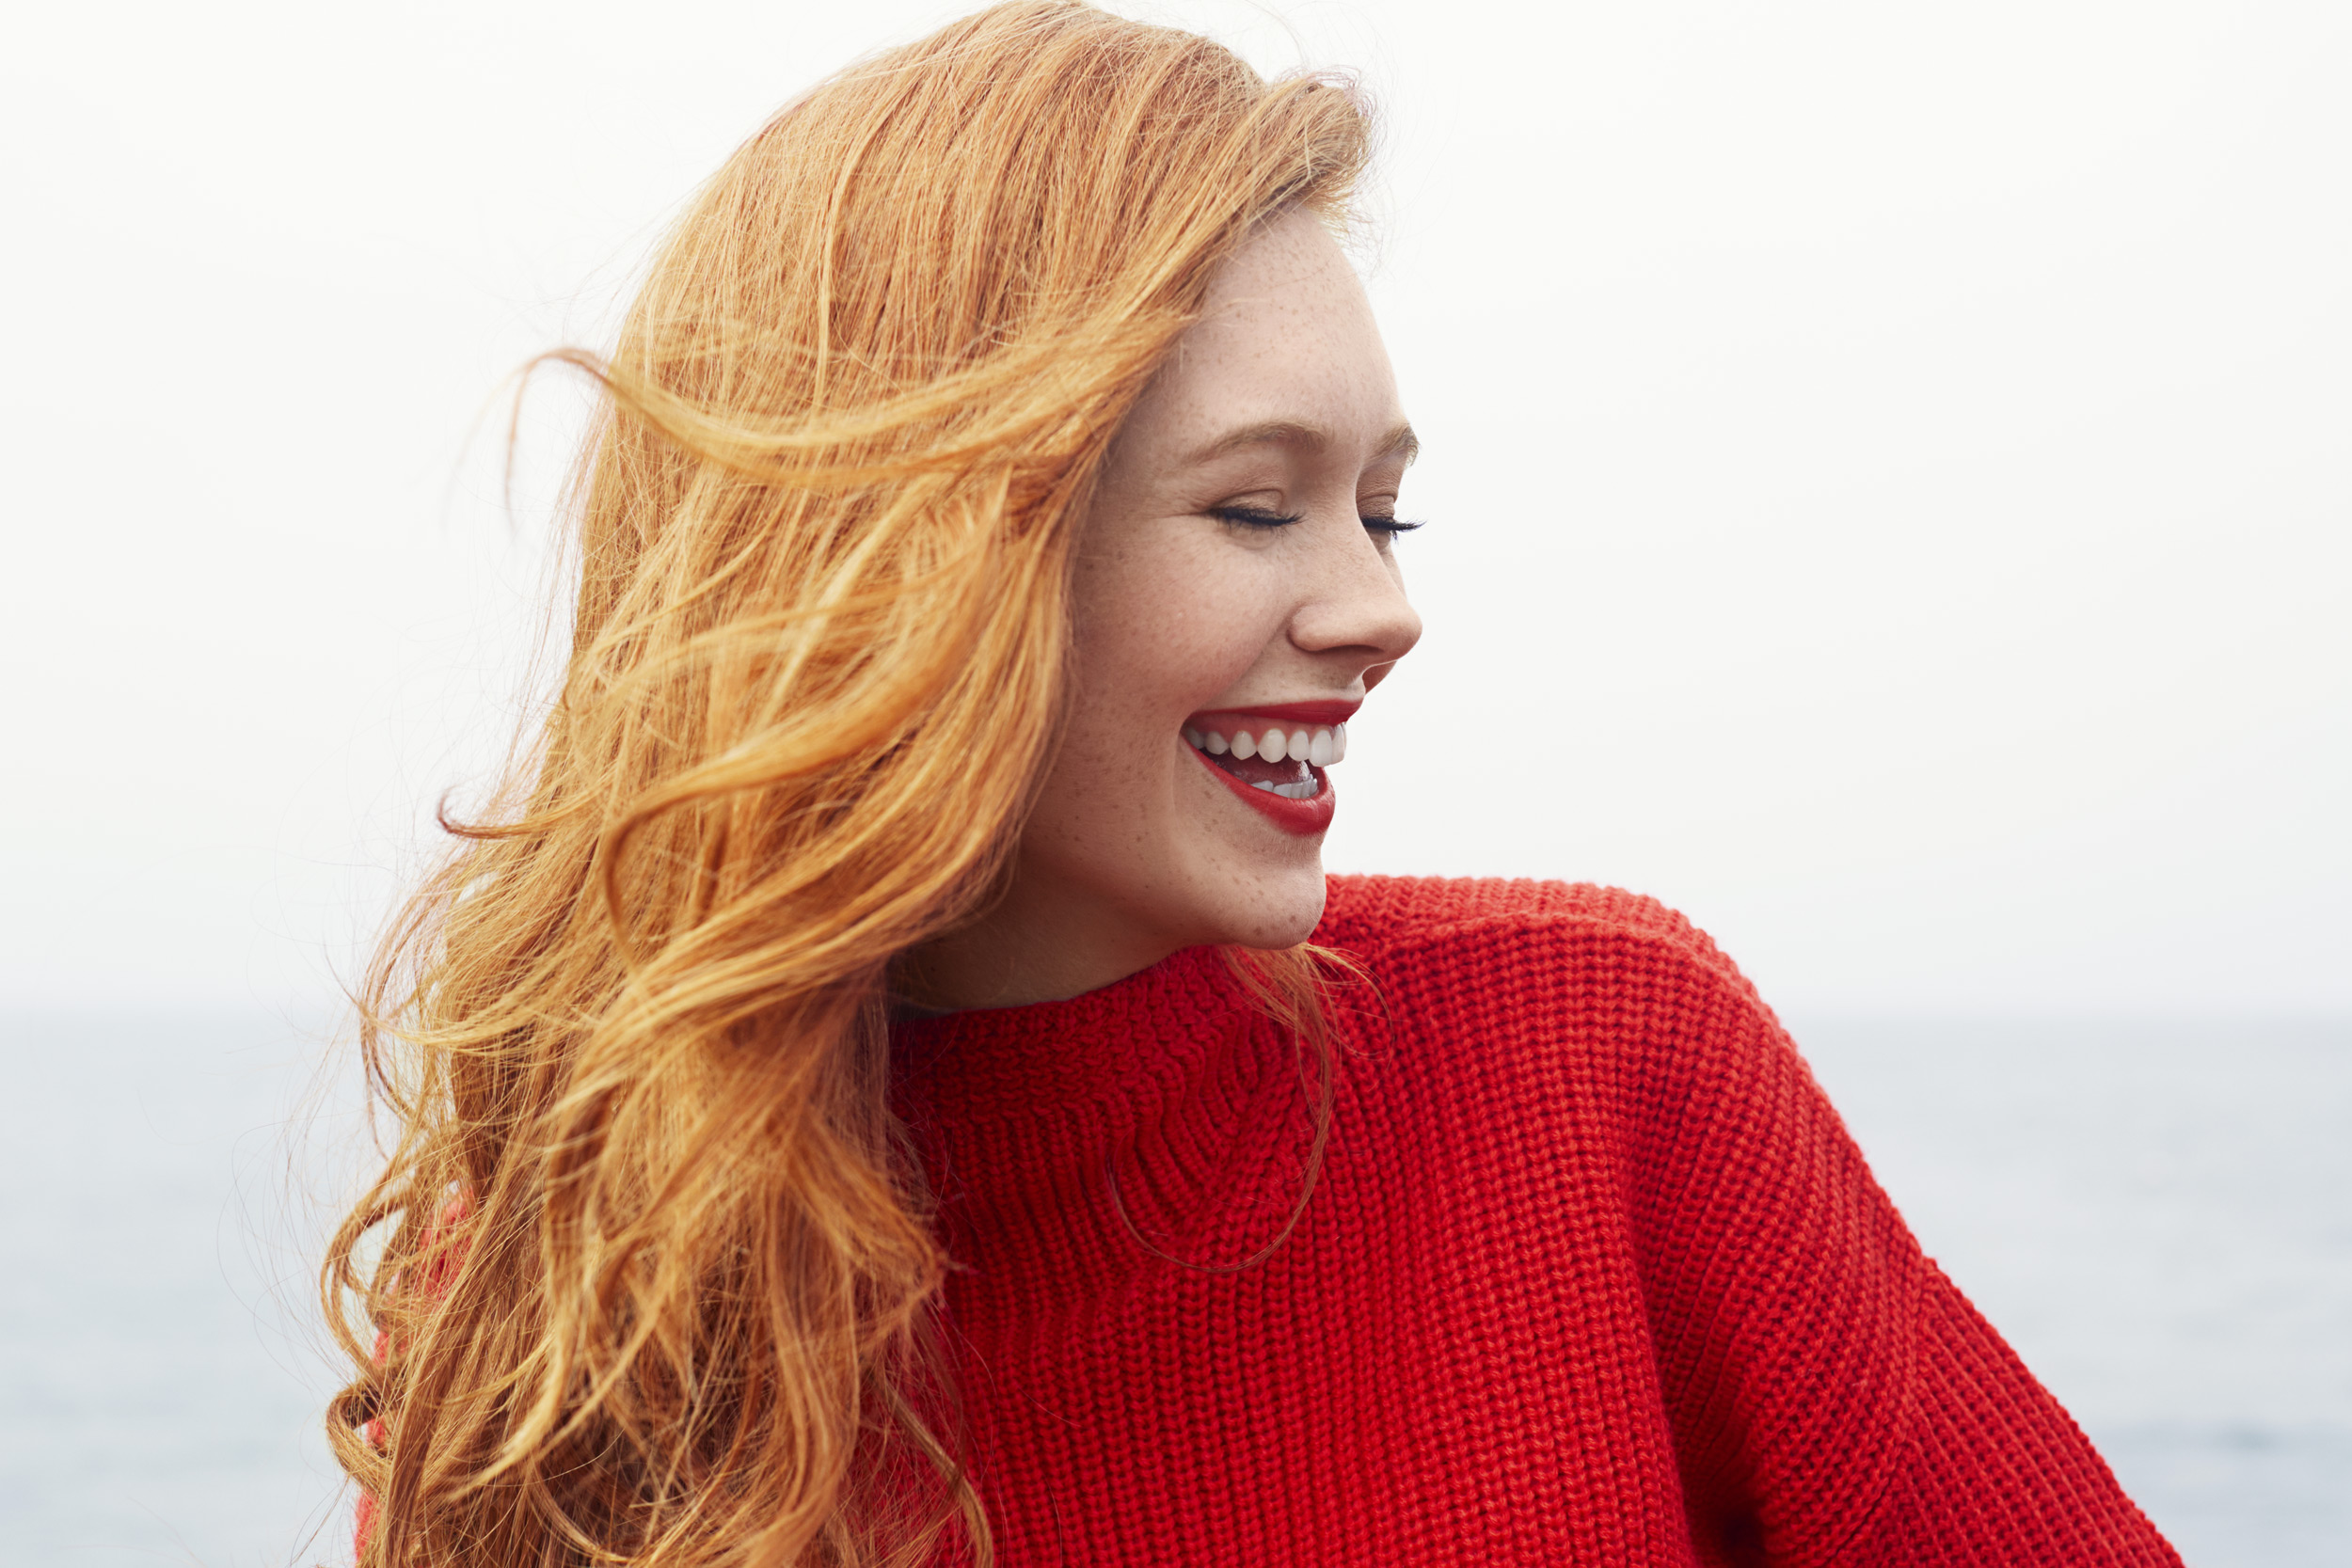 Millennial girl with red hair wearing a red sweater at the beach